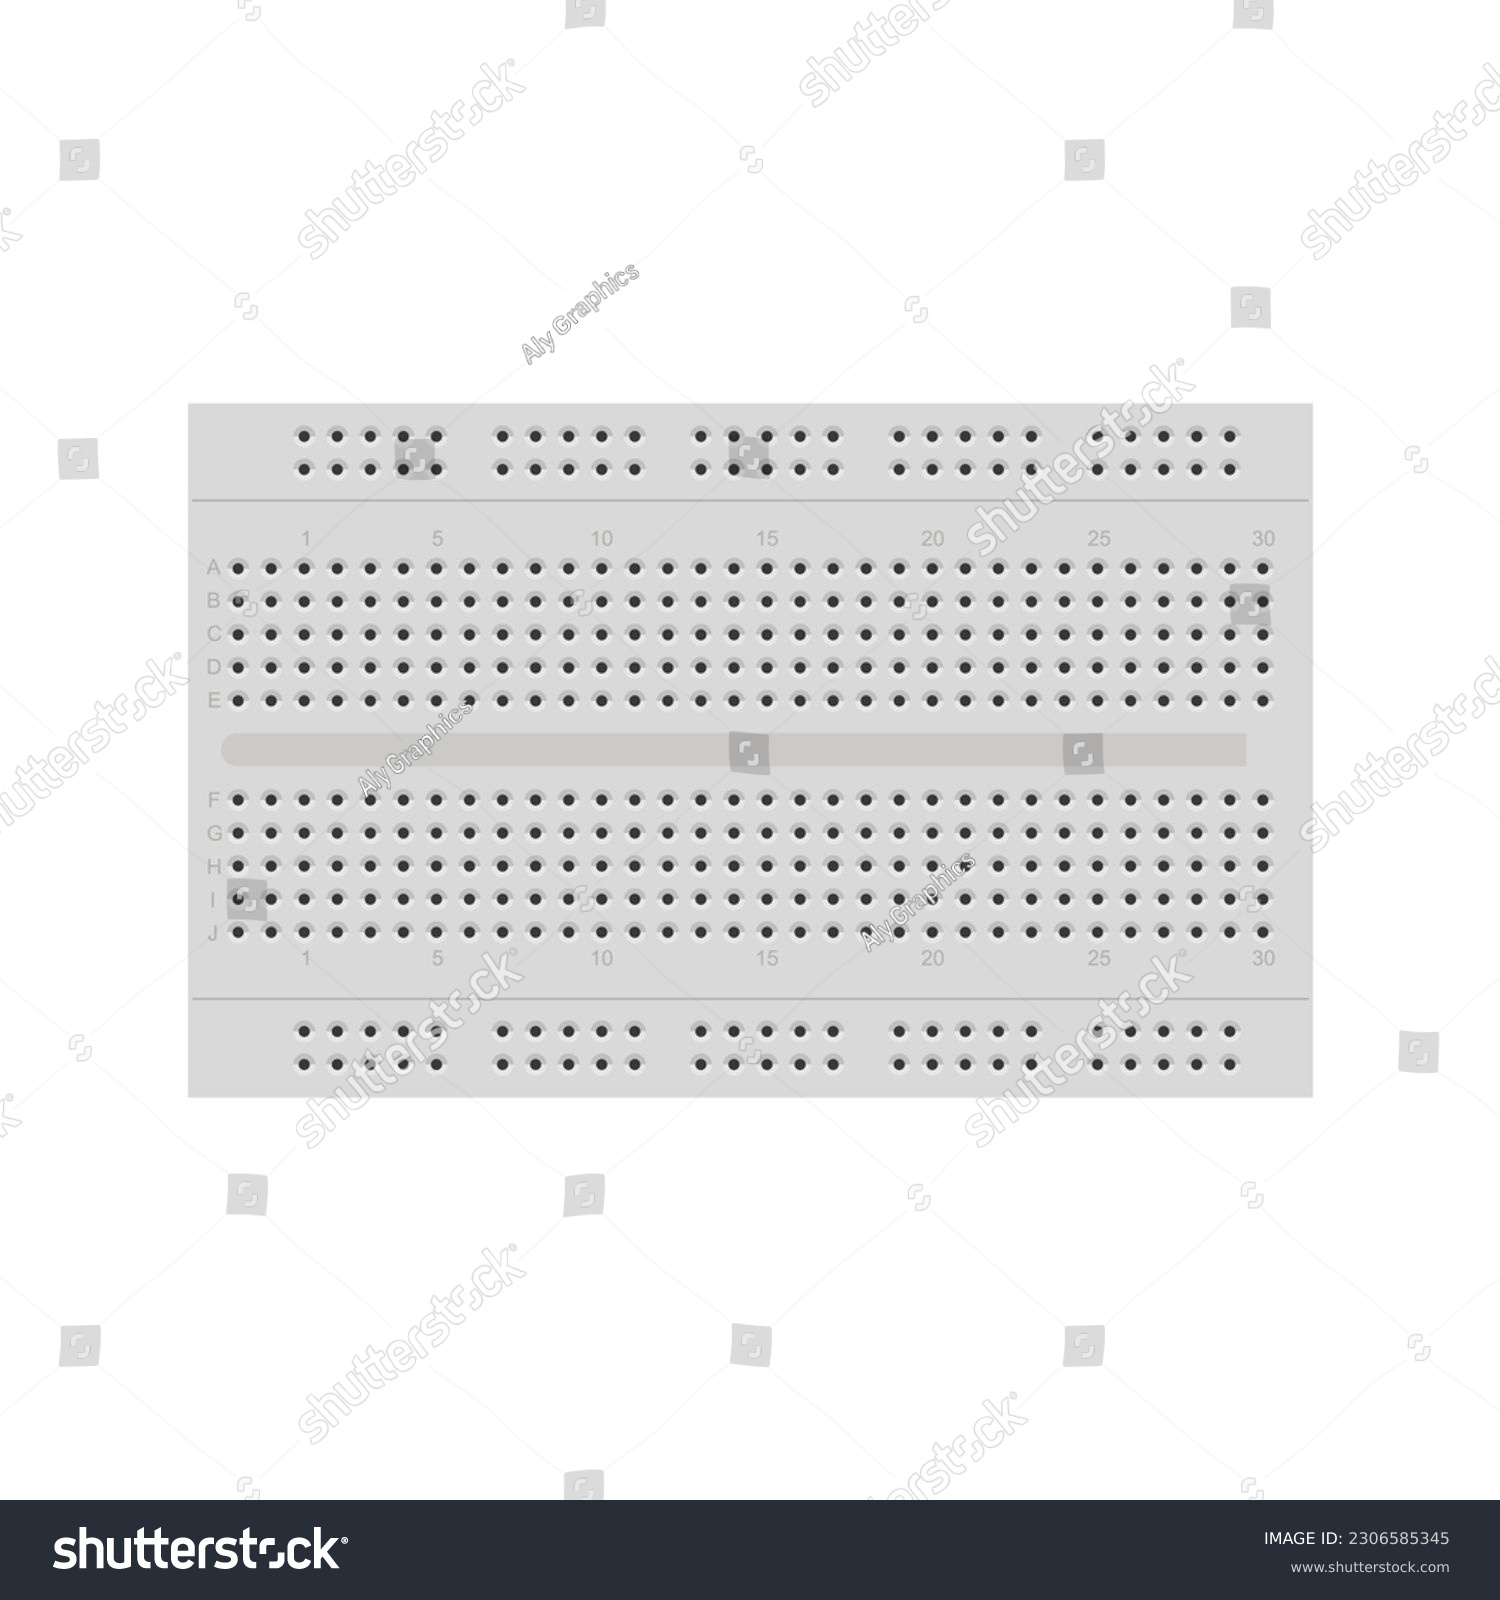 SVG of Breadboard vector illustration, offering graphic designers a visual representation of a standard breadboard, commonly used for prototyping svg